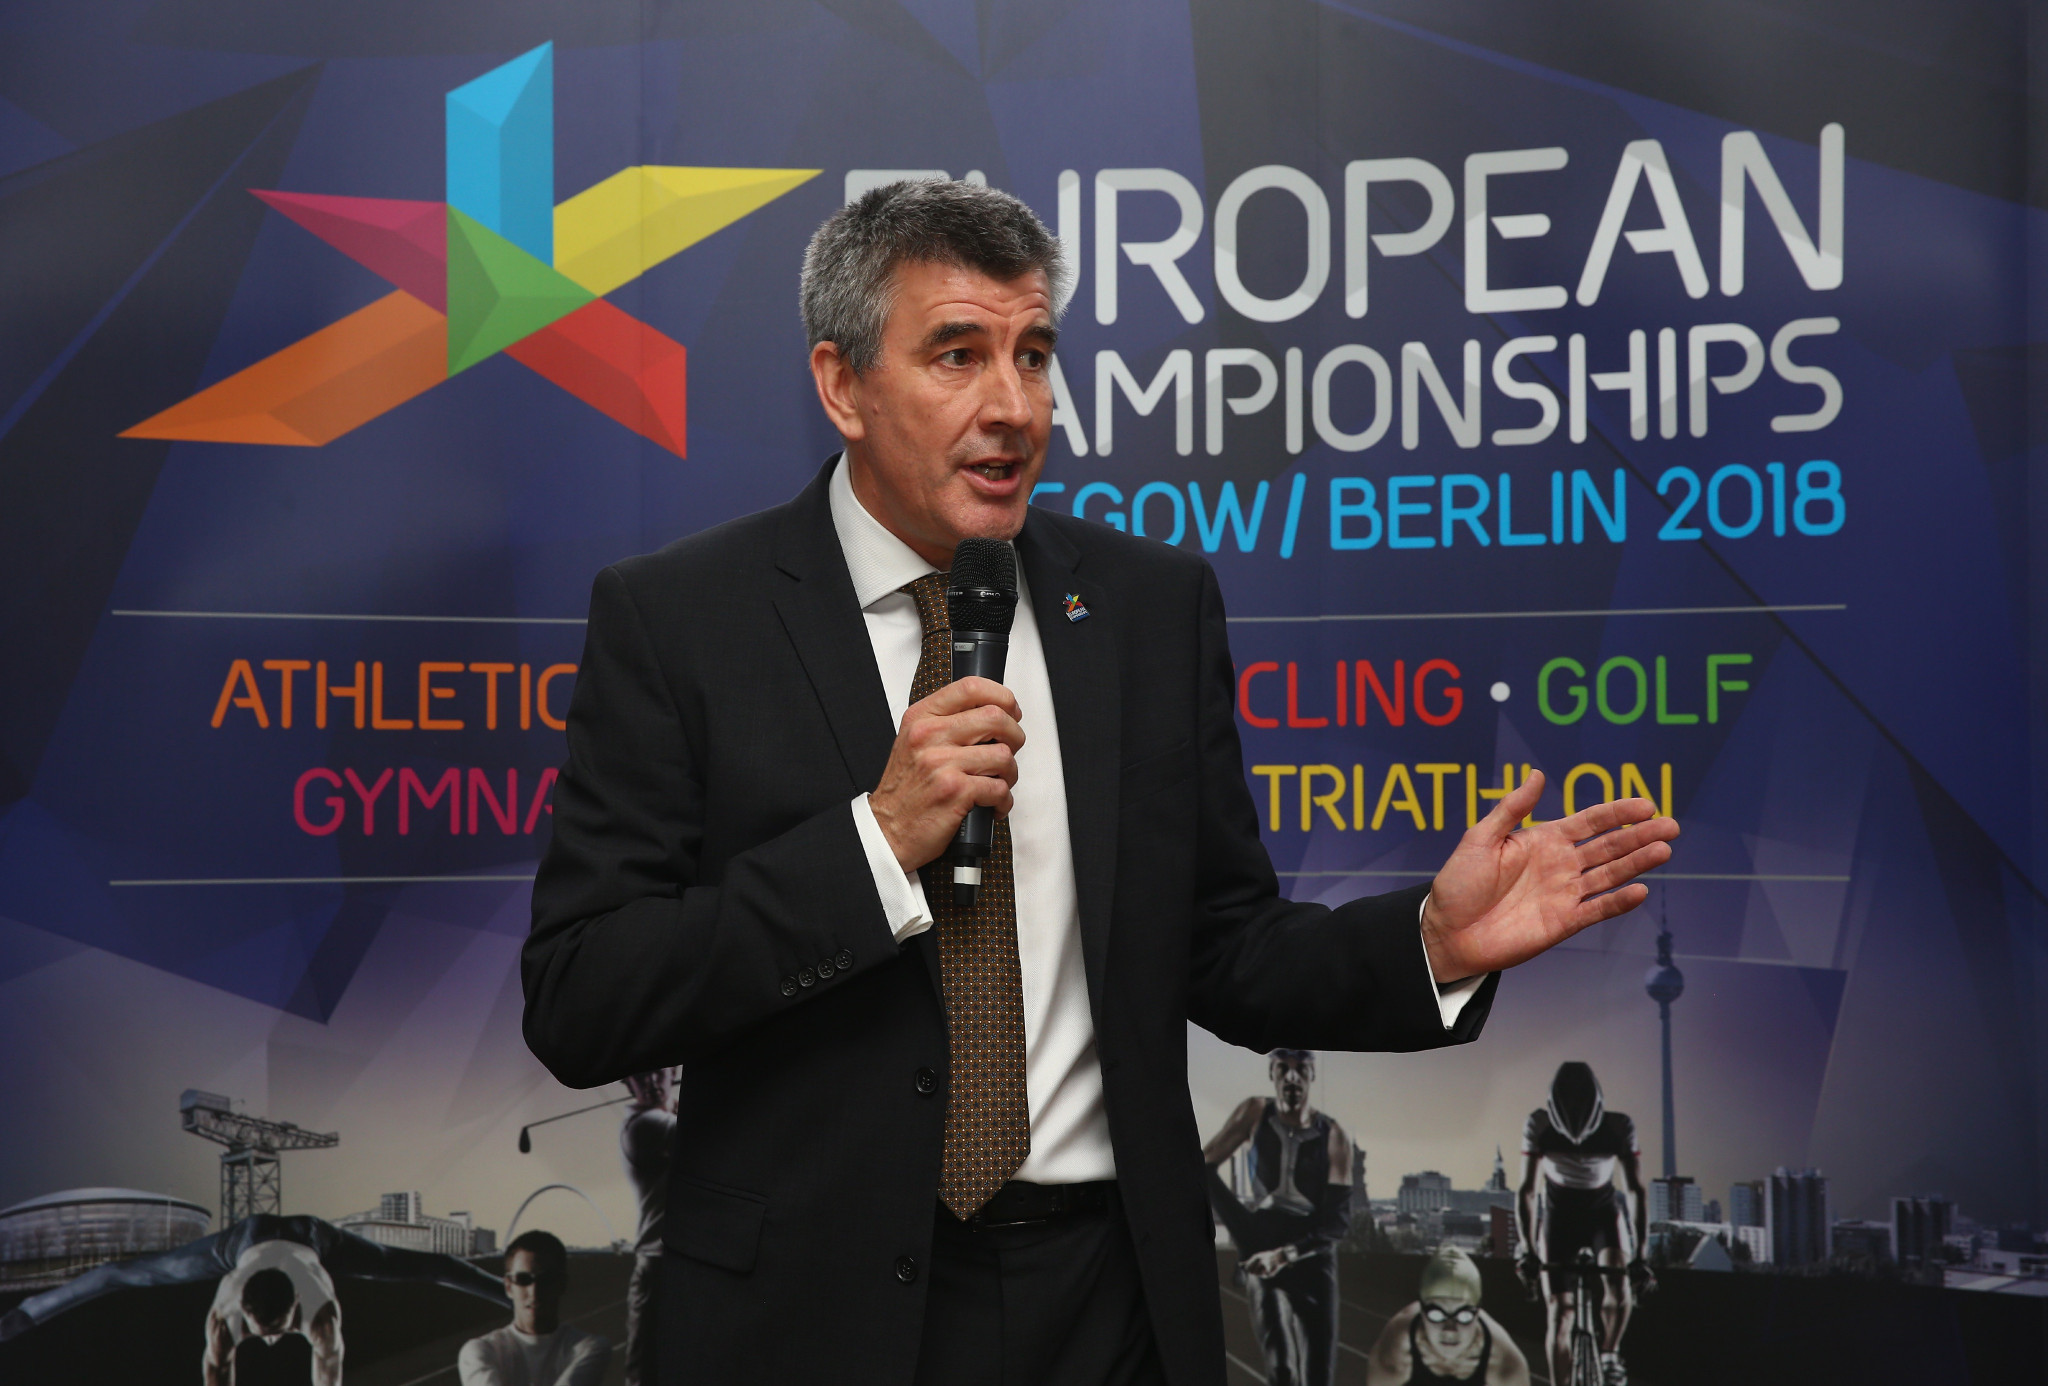 Paul Bristow, co-founder of the multi-sport European Championships, says: 